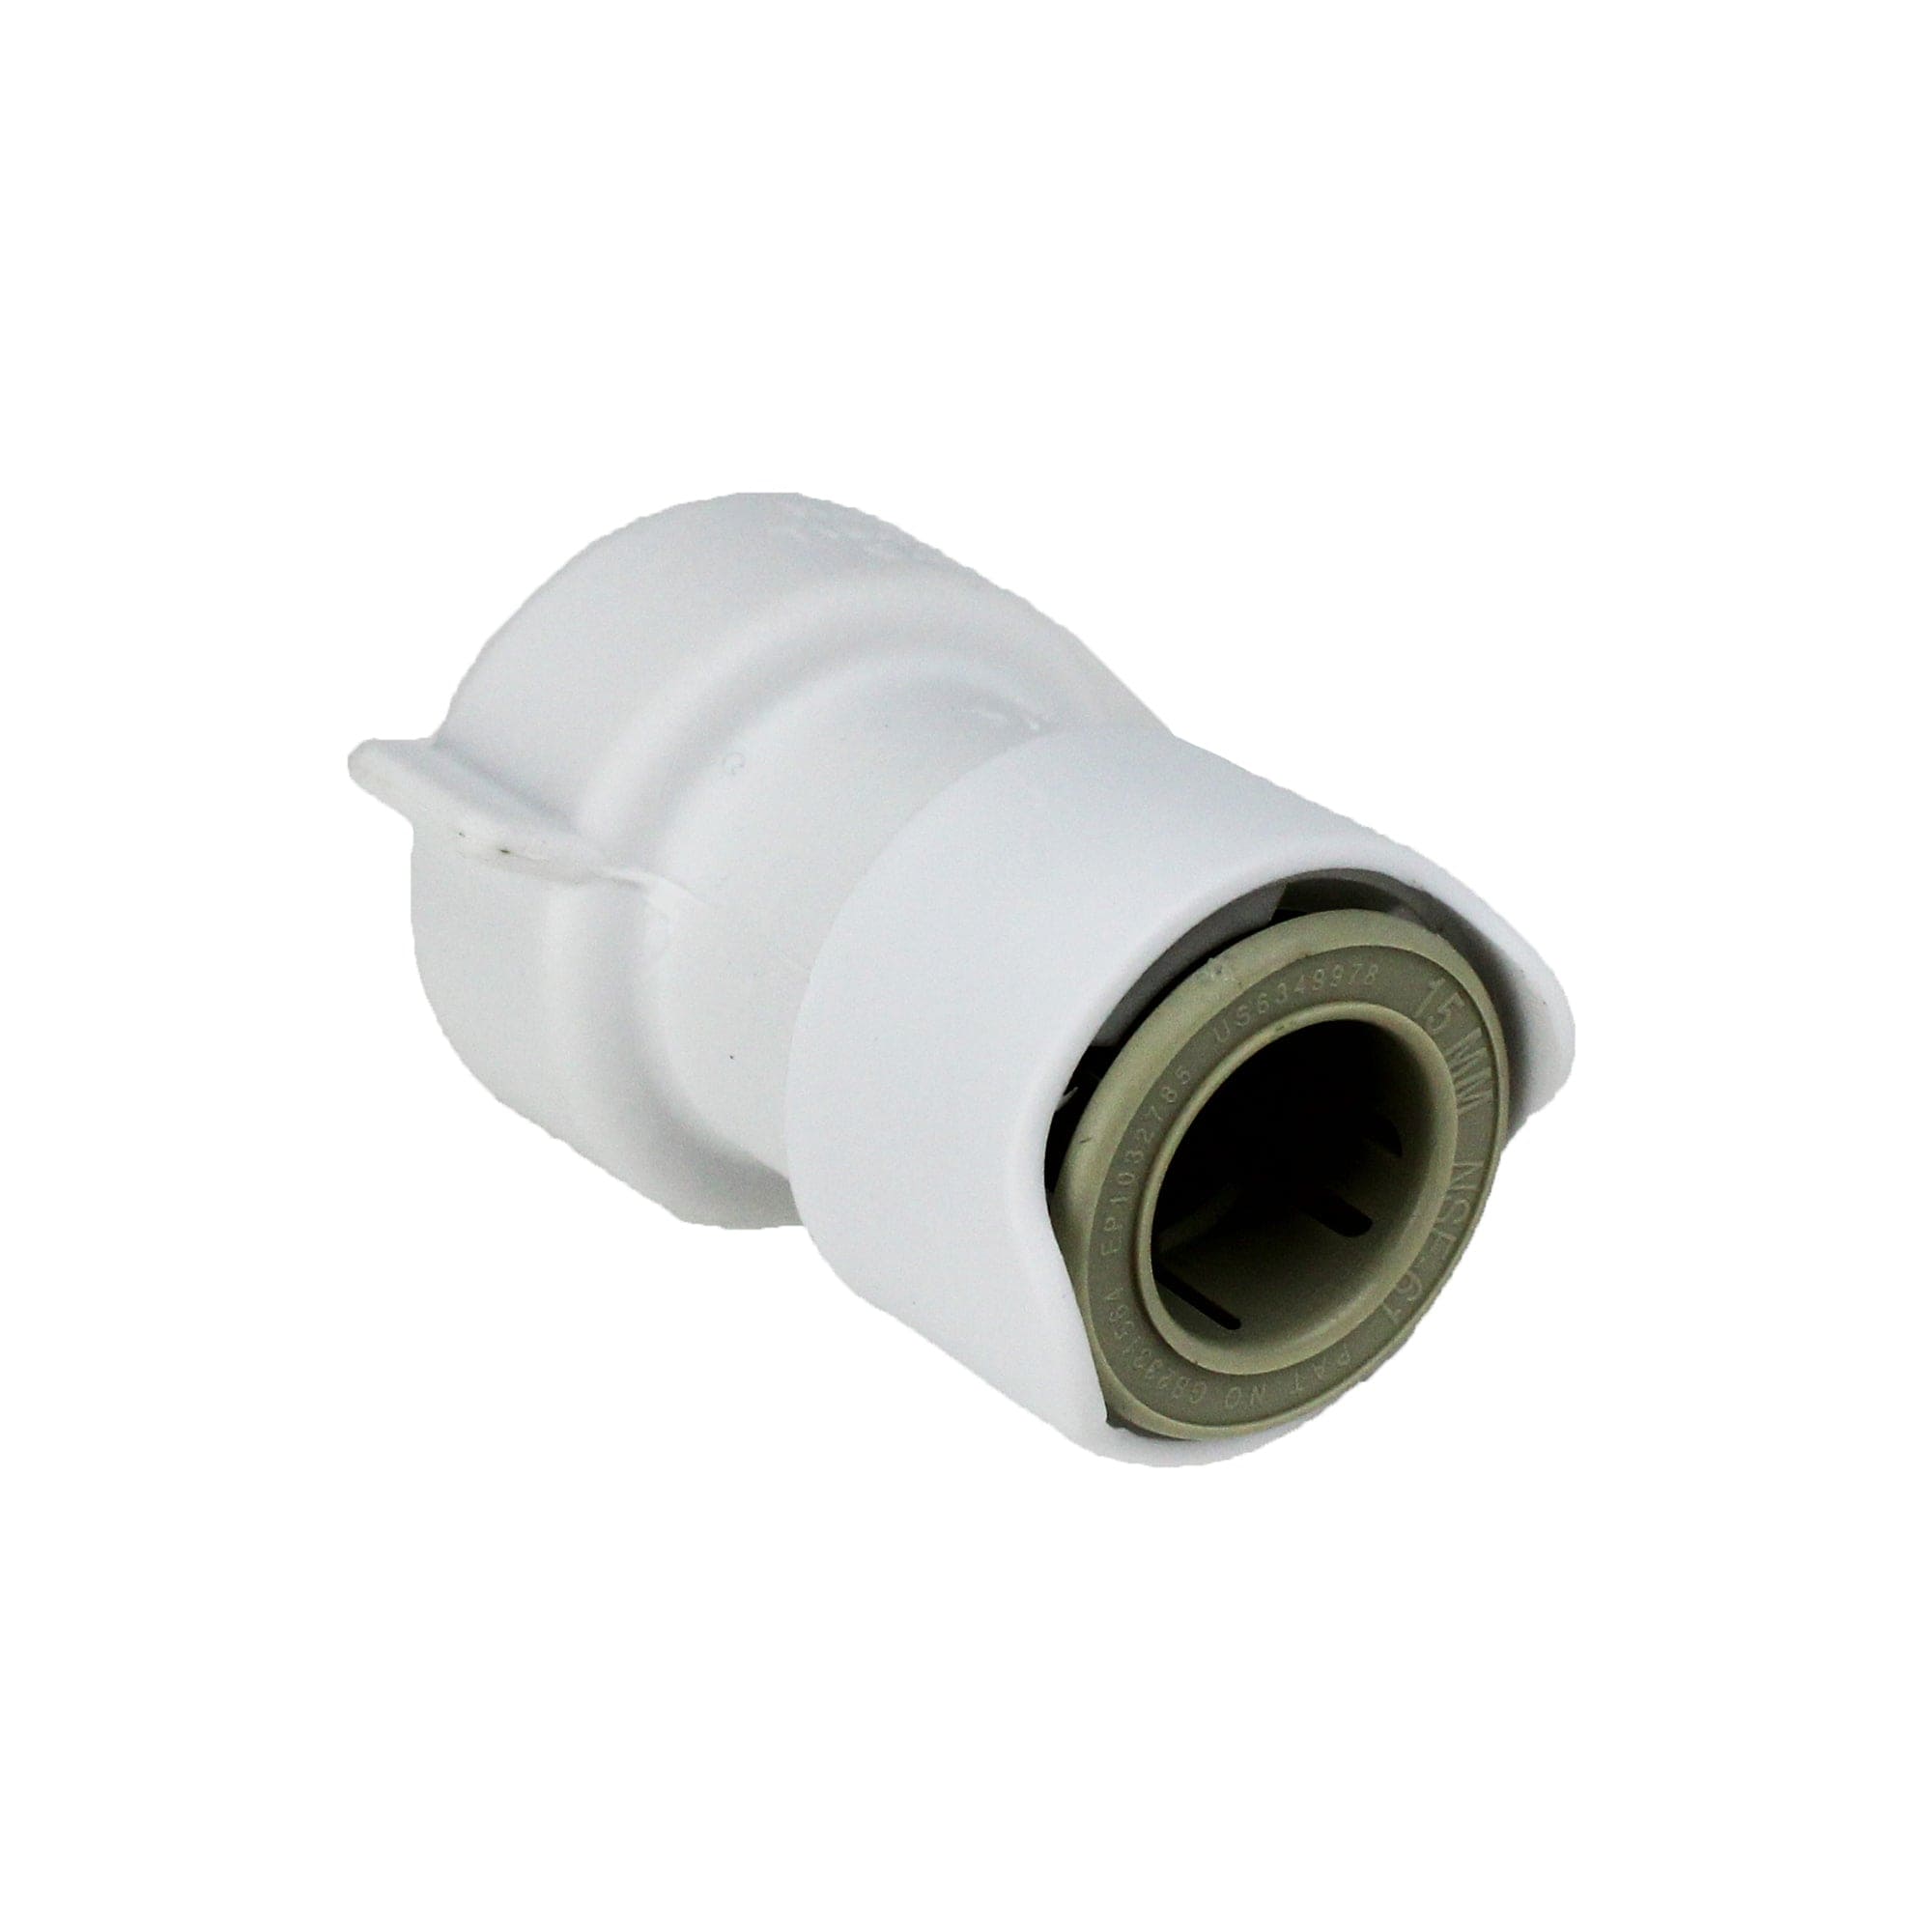 Attwood WX1542B Whale Quick Connect Water System Adapter 15mm to 3/4" BSP